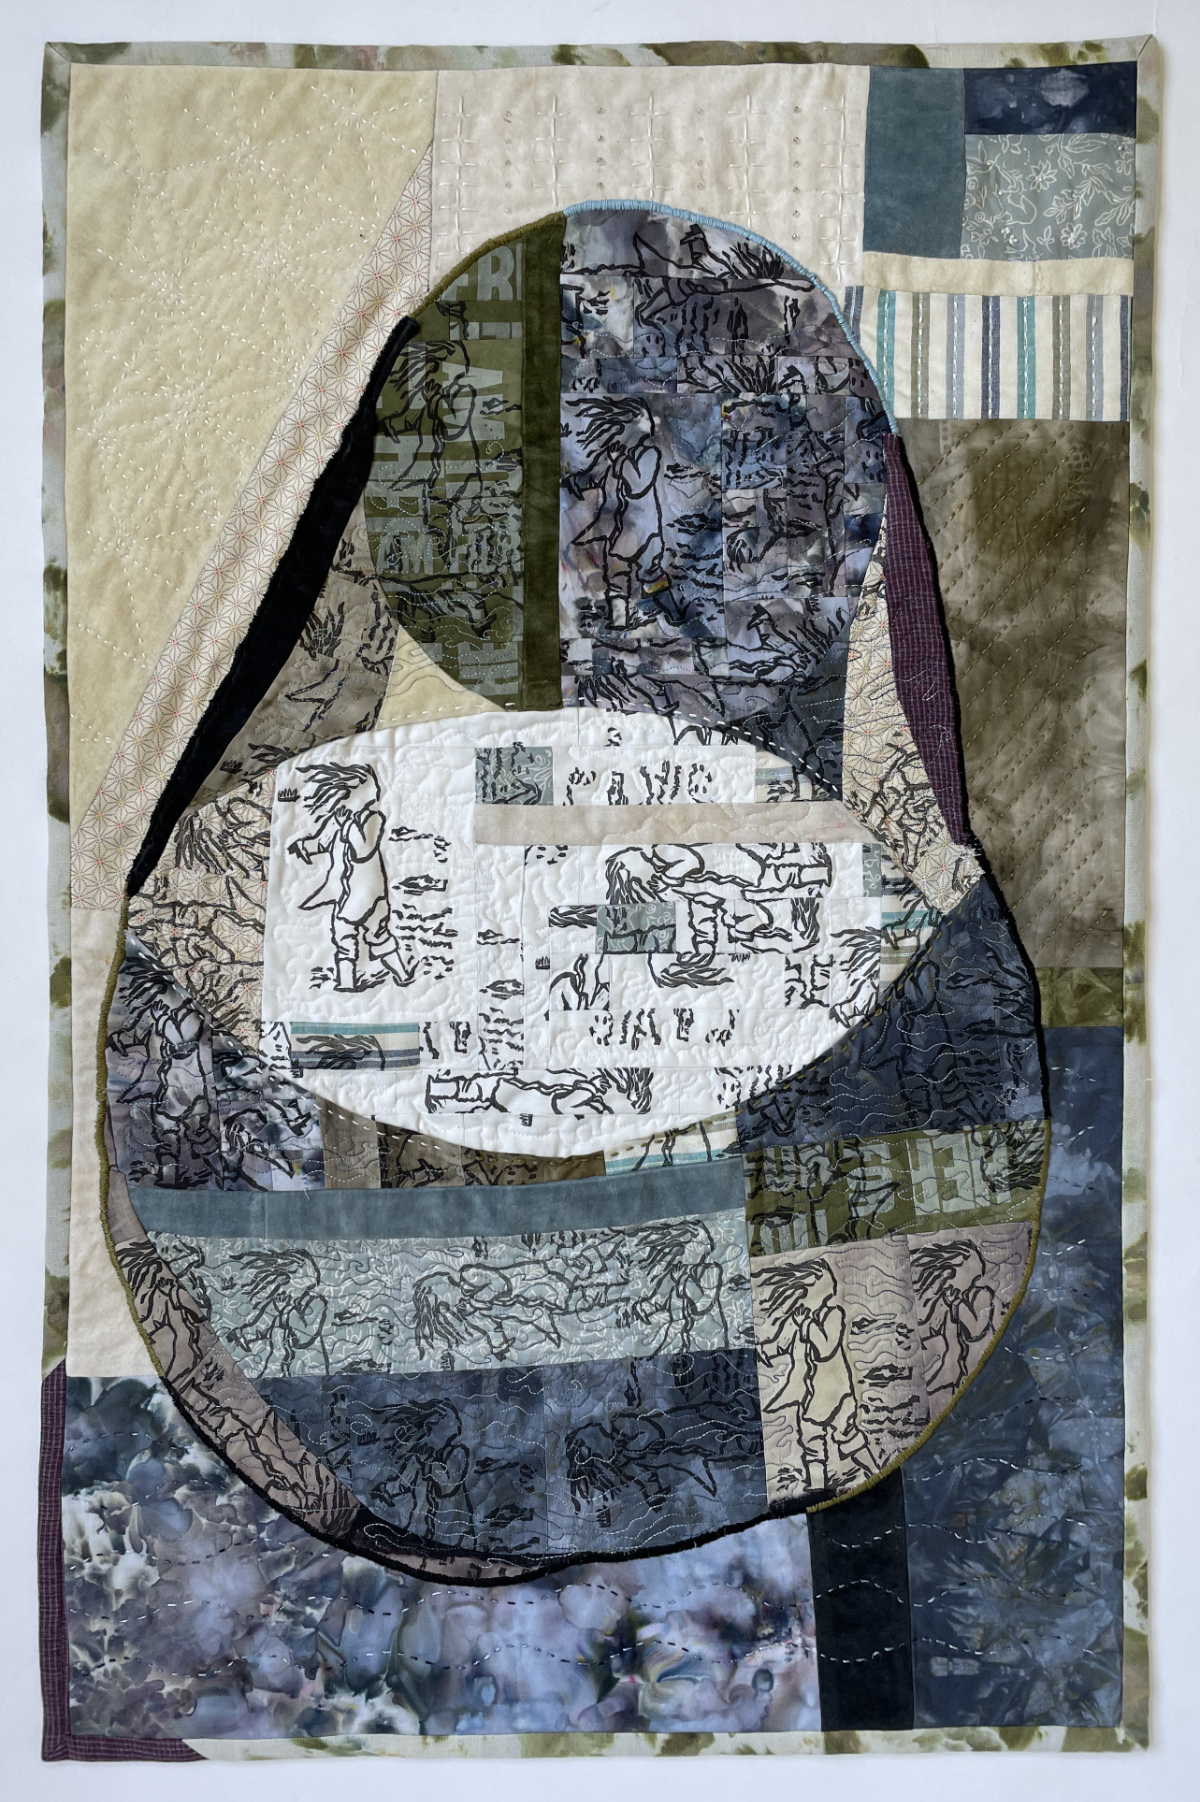 quilt with large pieced egg or pear shape and linocut prints on cotton of a windblown woman wading in the water